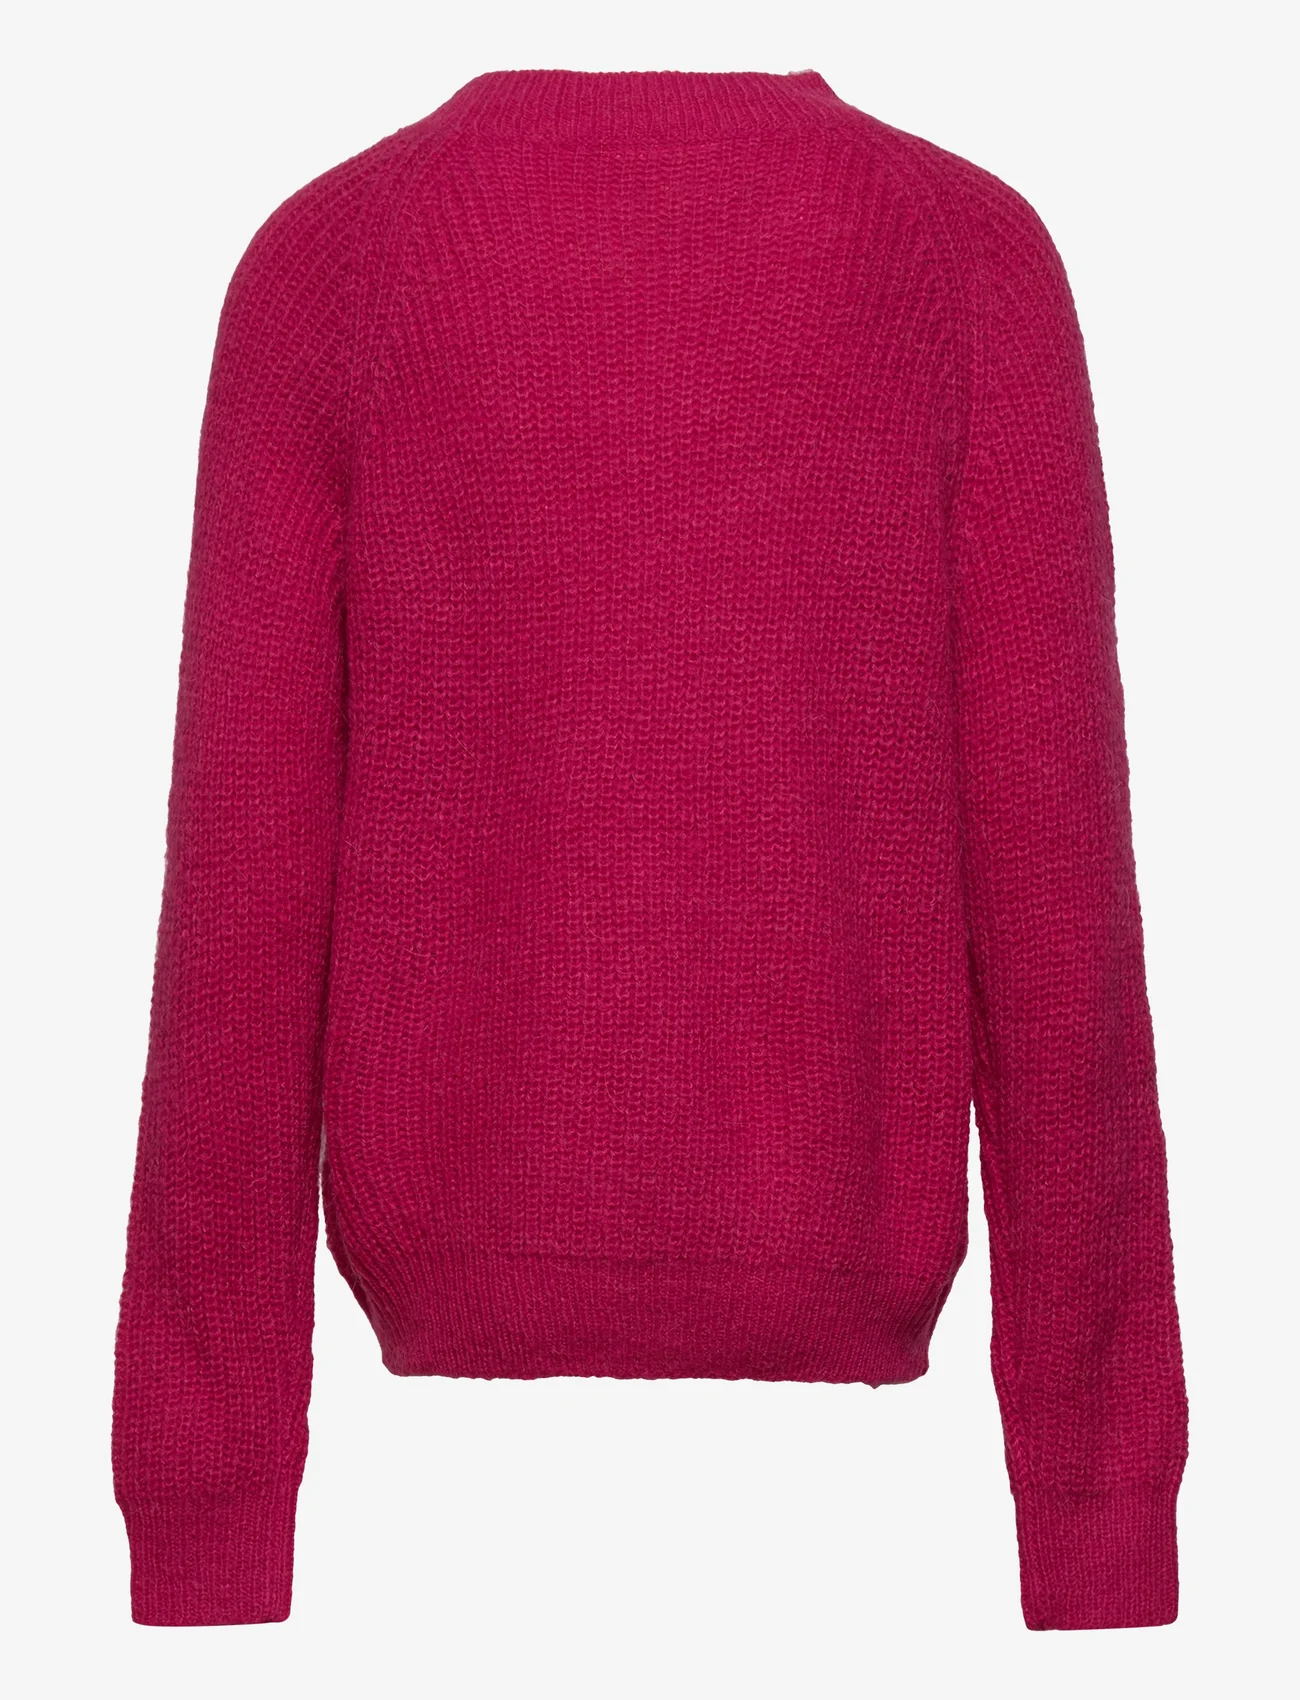 Soft Gallery - SGKiki knit Pullover - gensere - pink peacock - 1